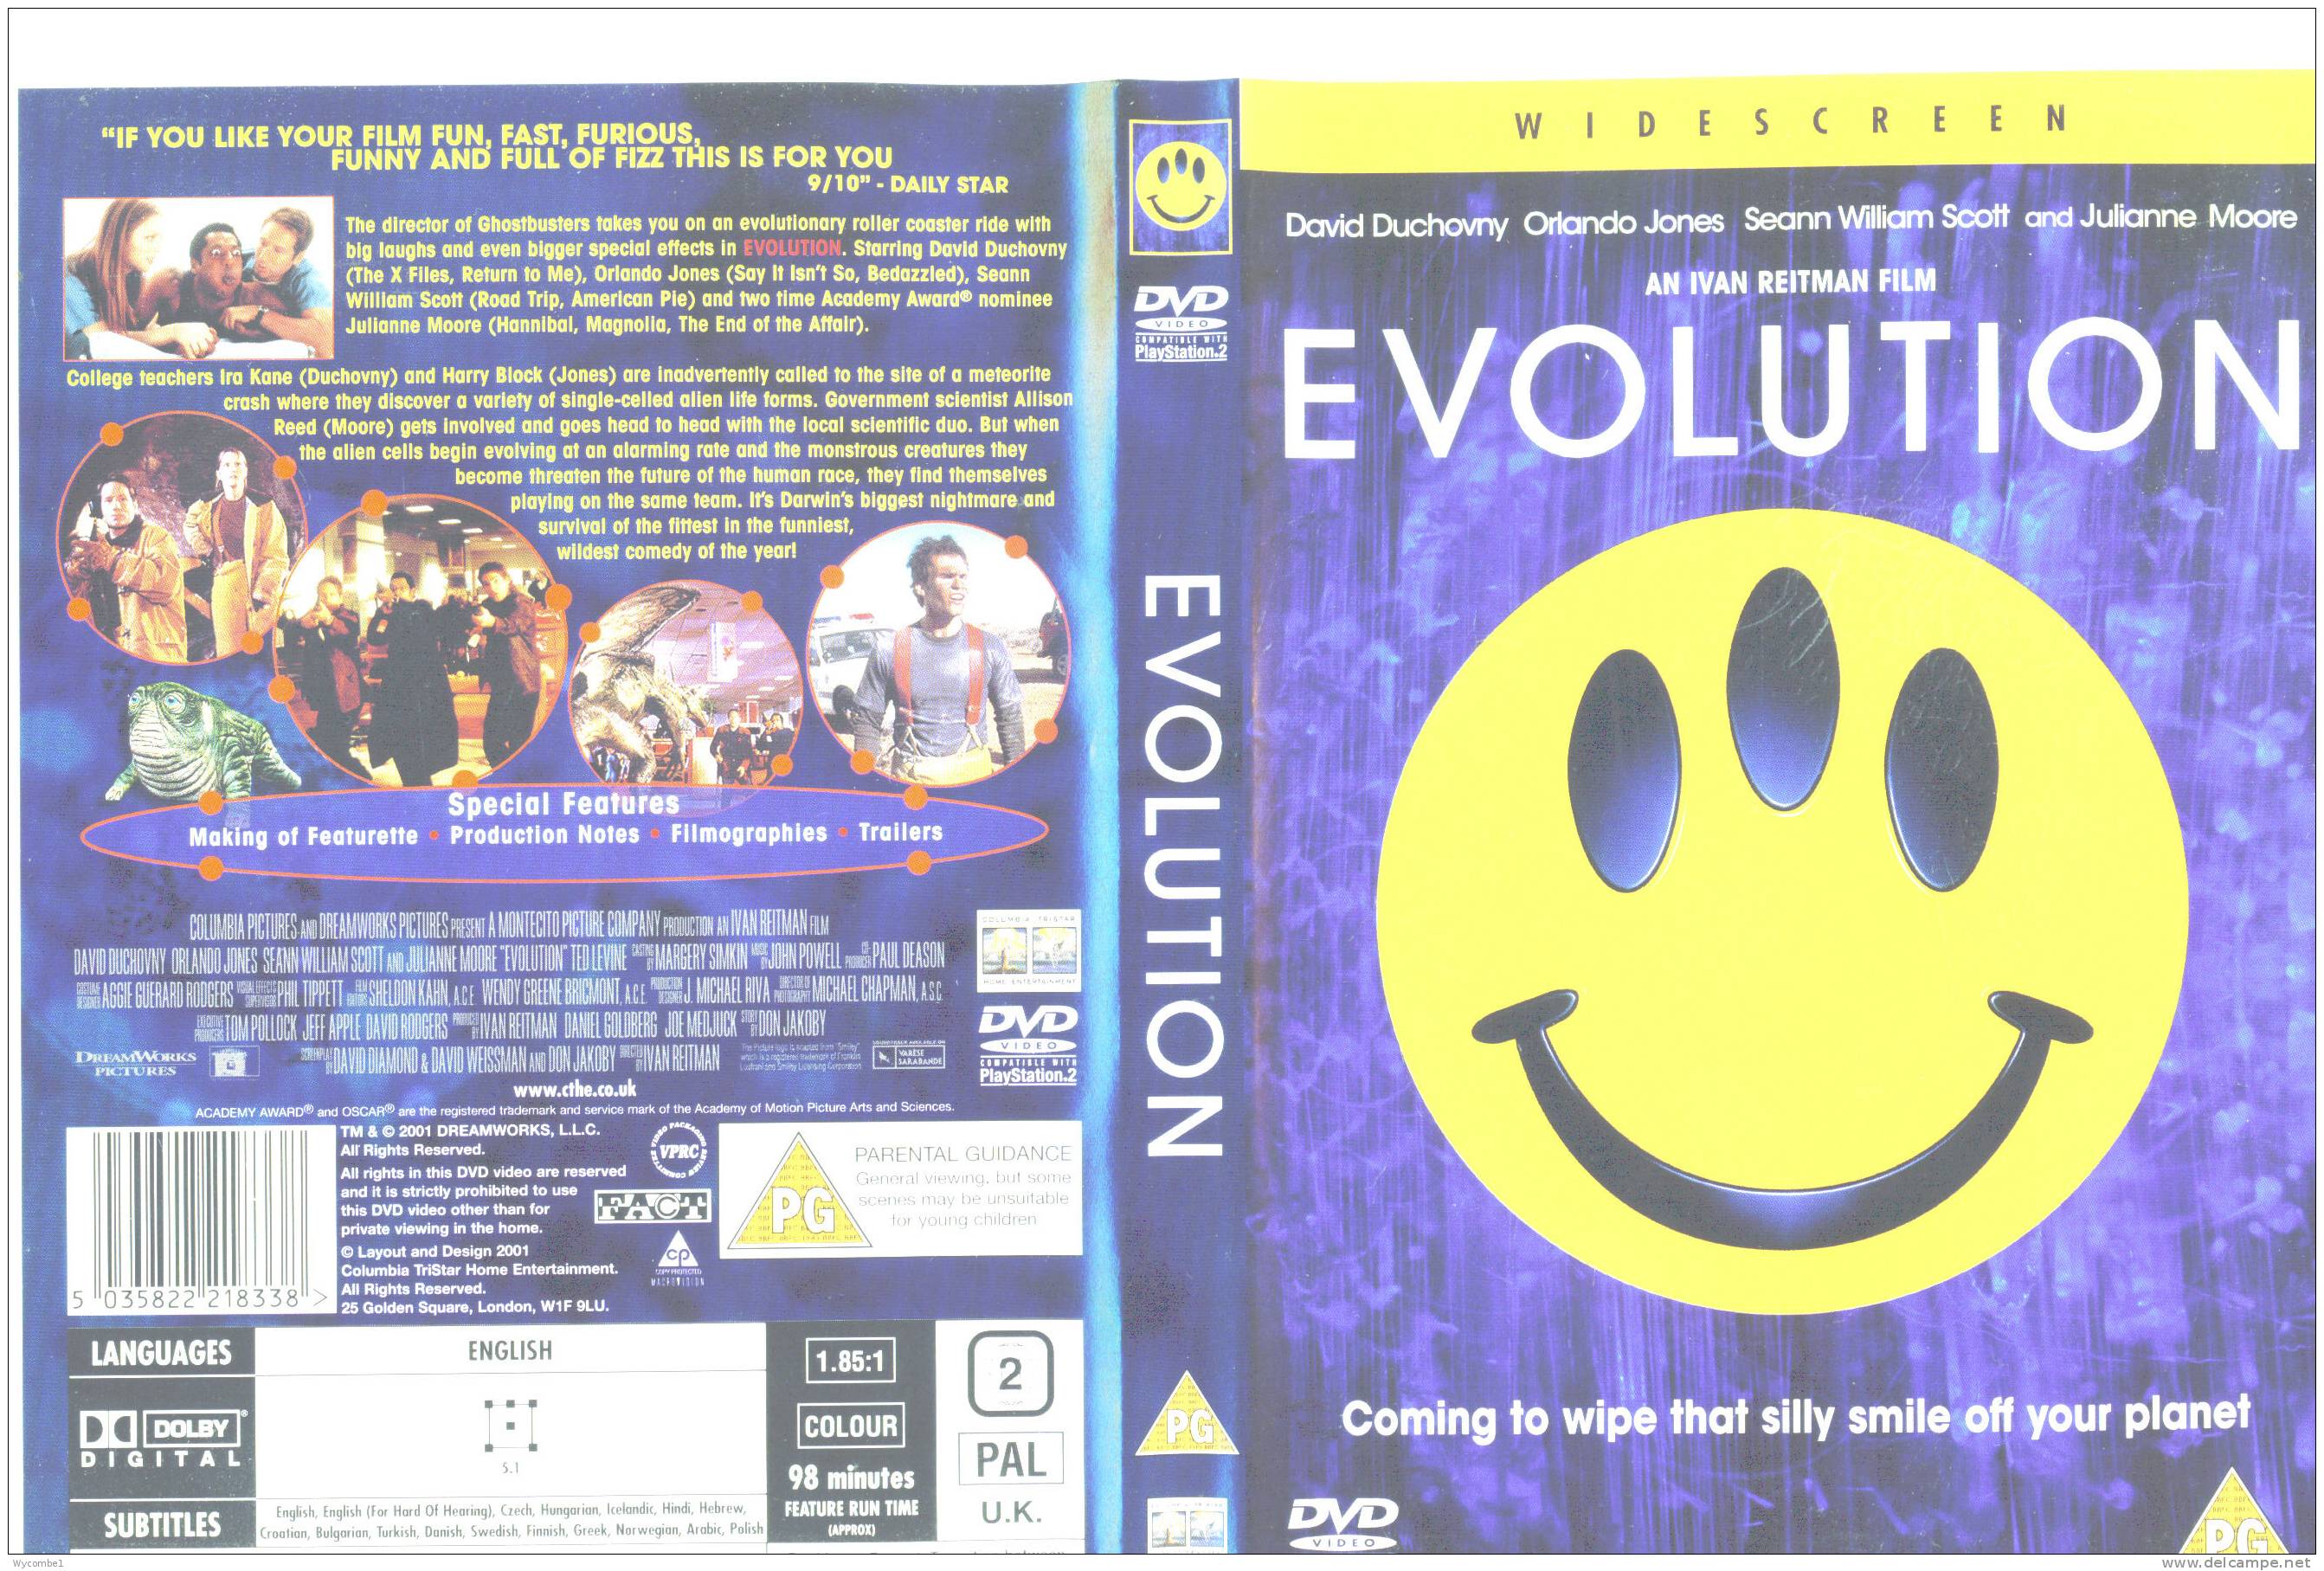 EVOLUTION - David Duchovny (Details In Scan) - Comedy